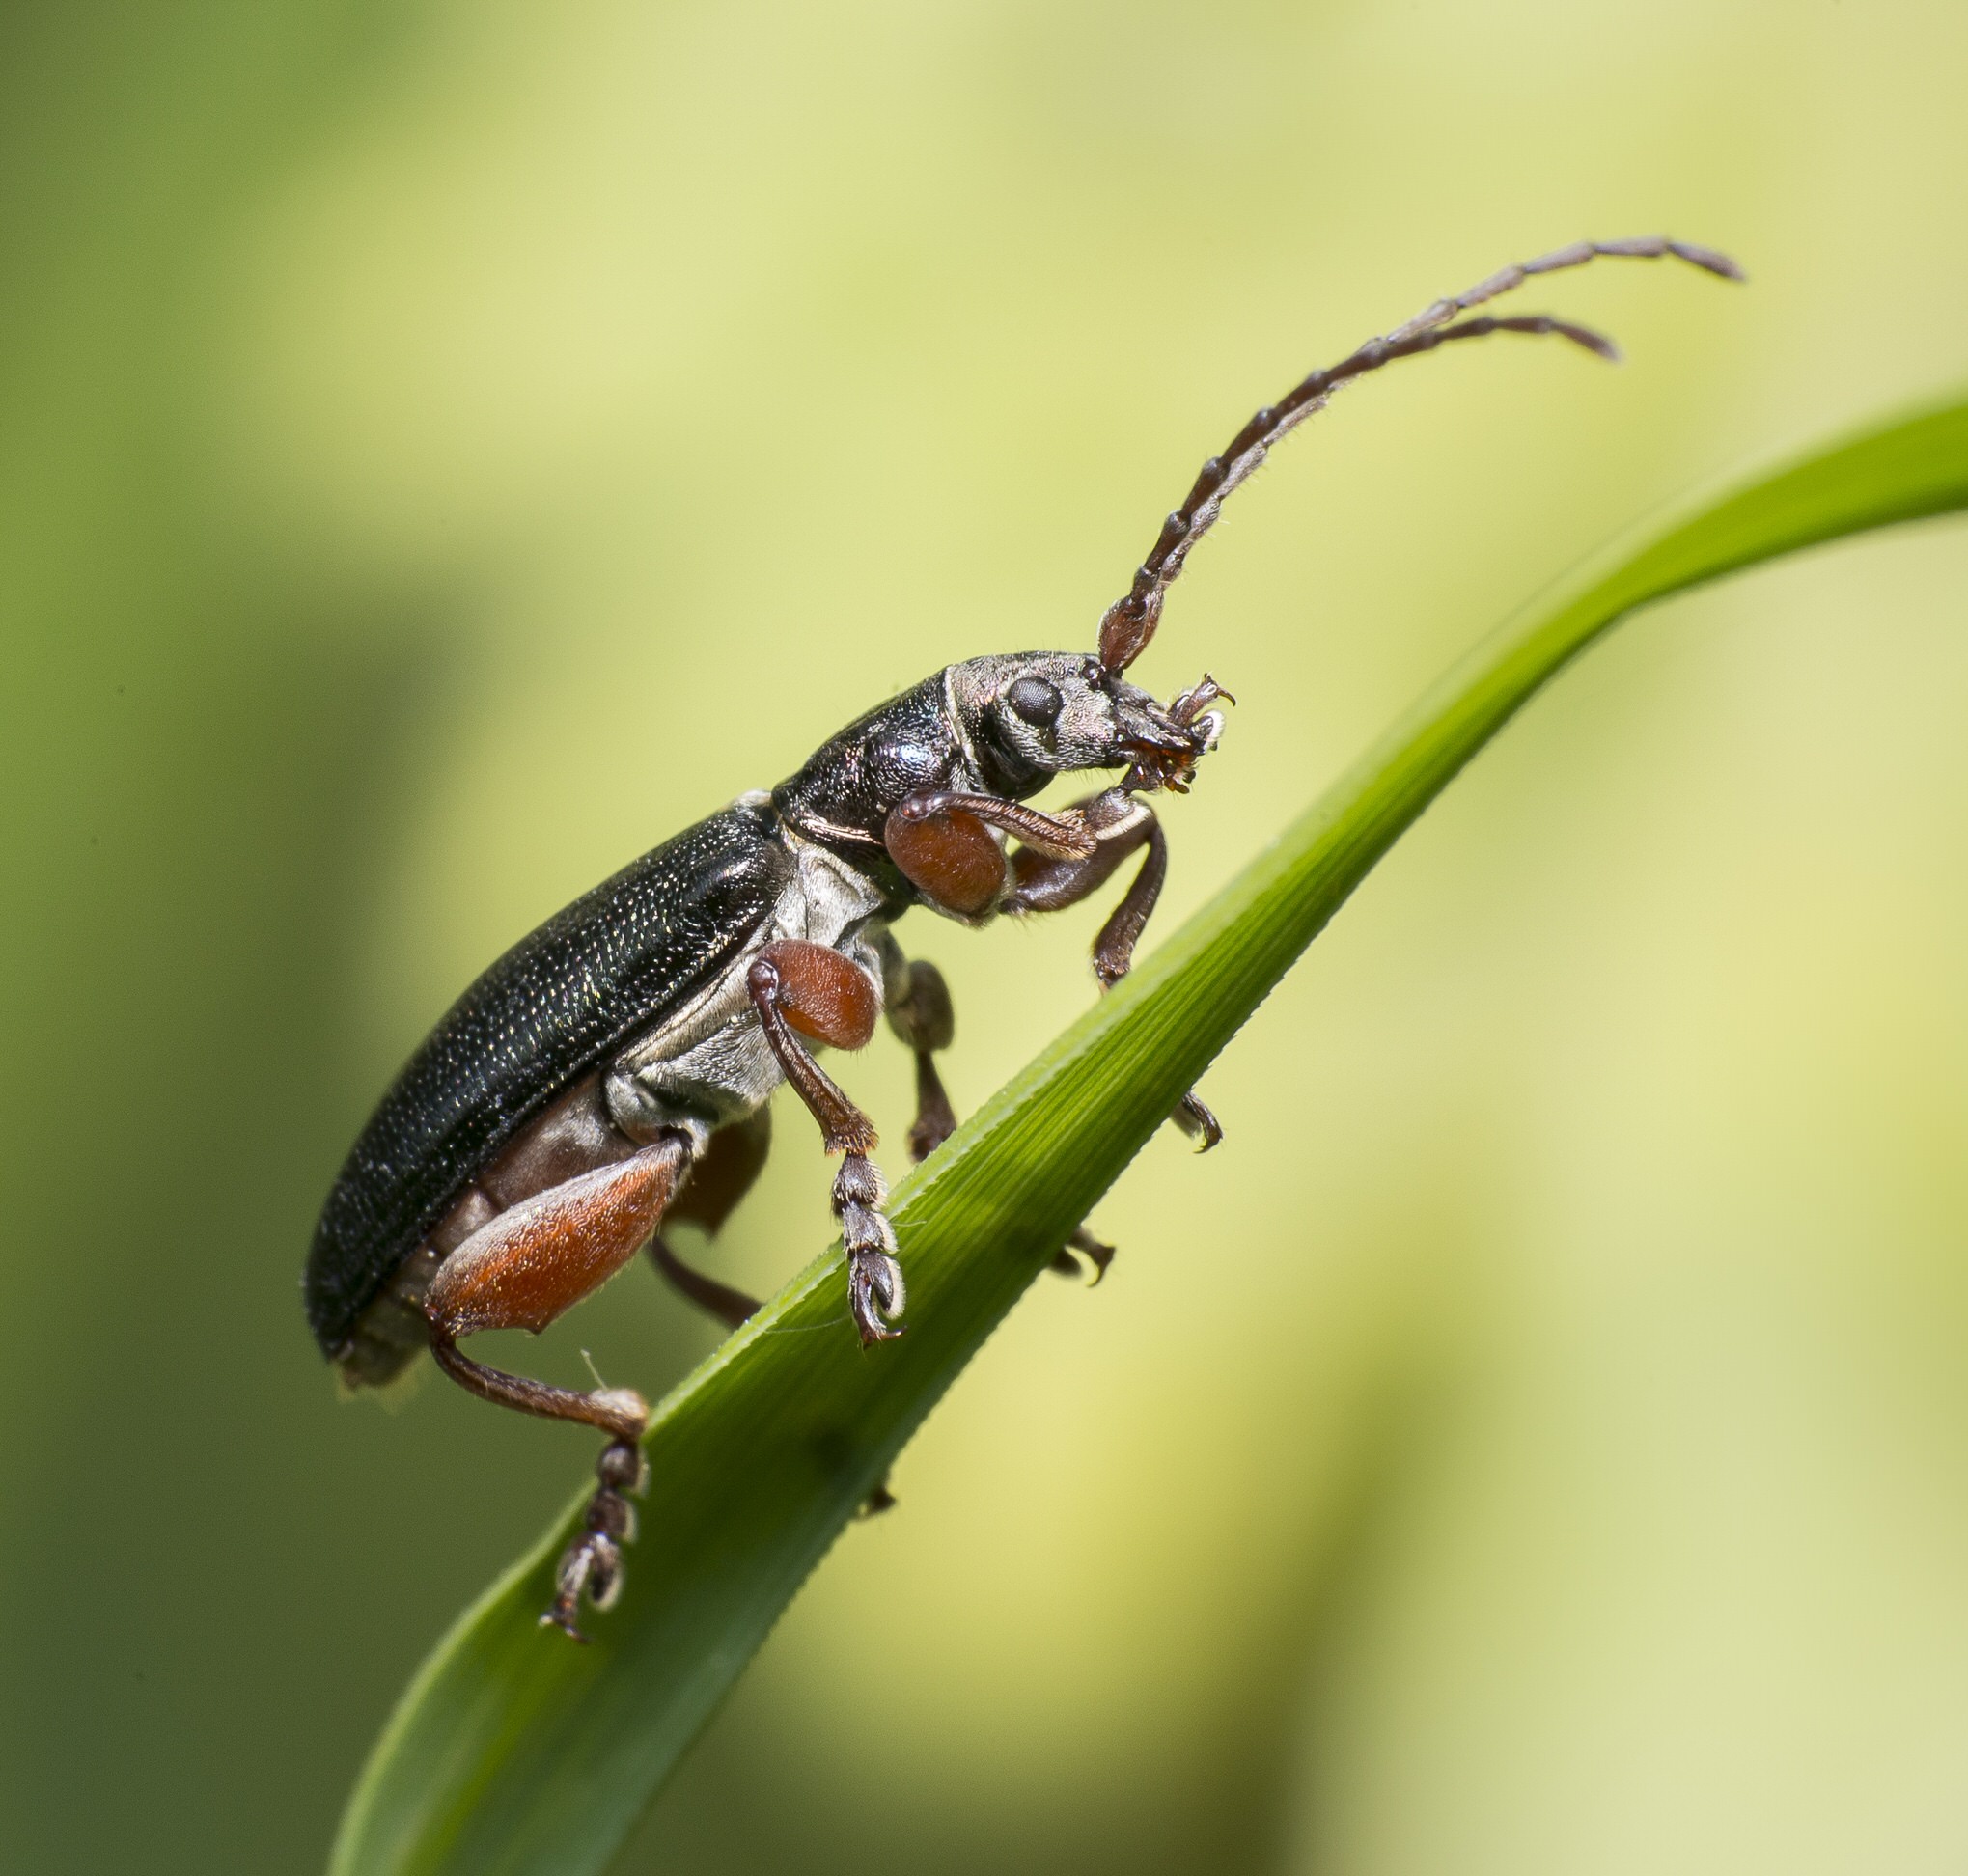 A reed beetle (Plateumaris sp.) of the beetle family Chrysomelidae. This is an uncommon species in the UK, though Woodwalton Fen provides a typical habitat for these reed-feeding insects.